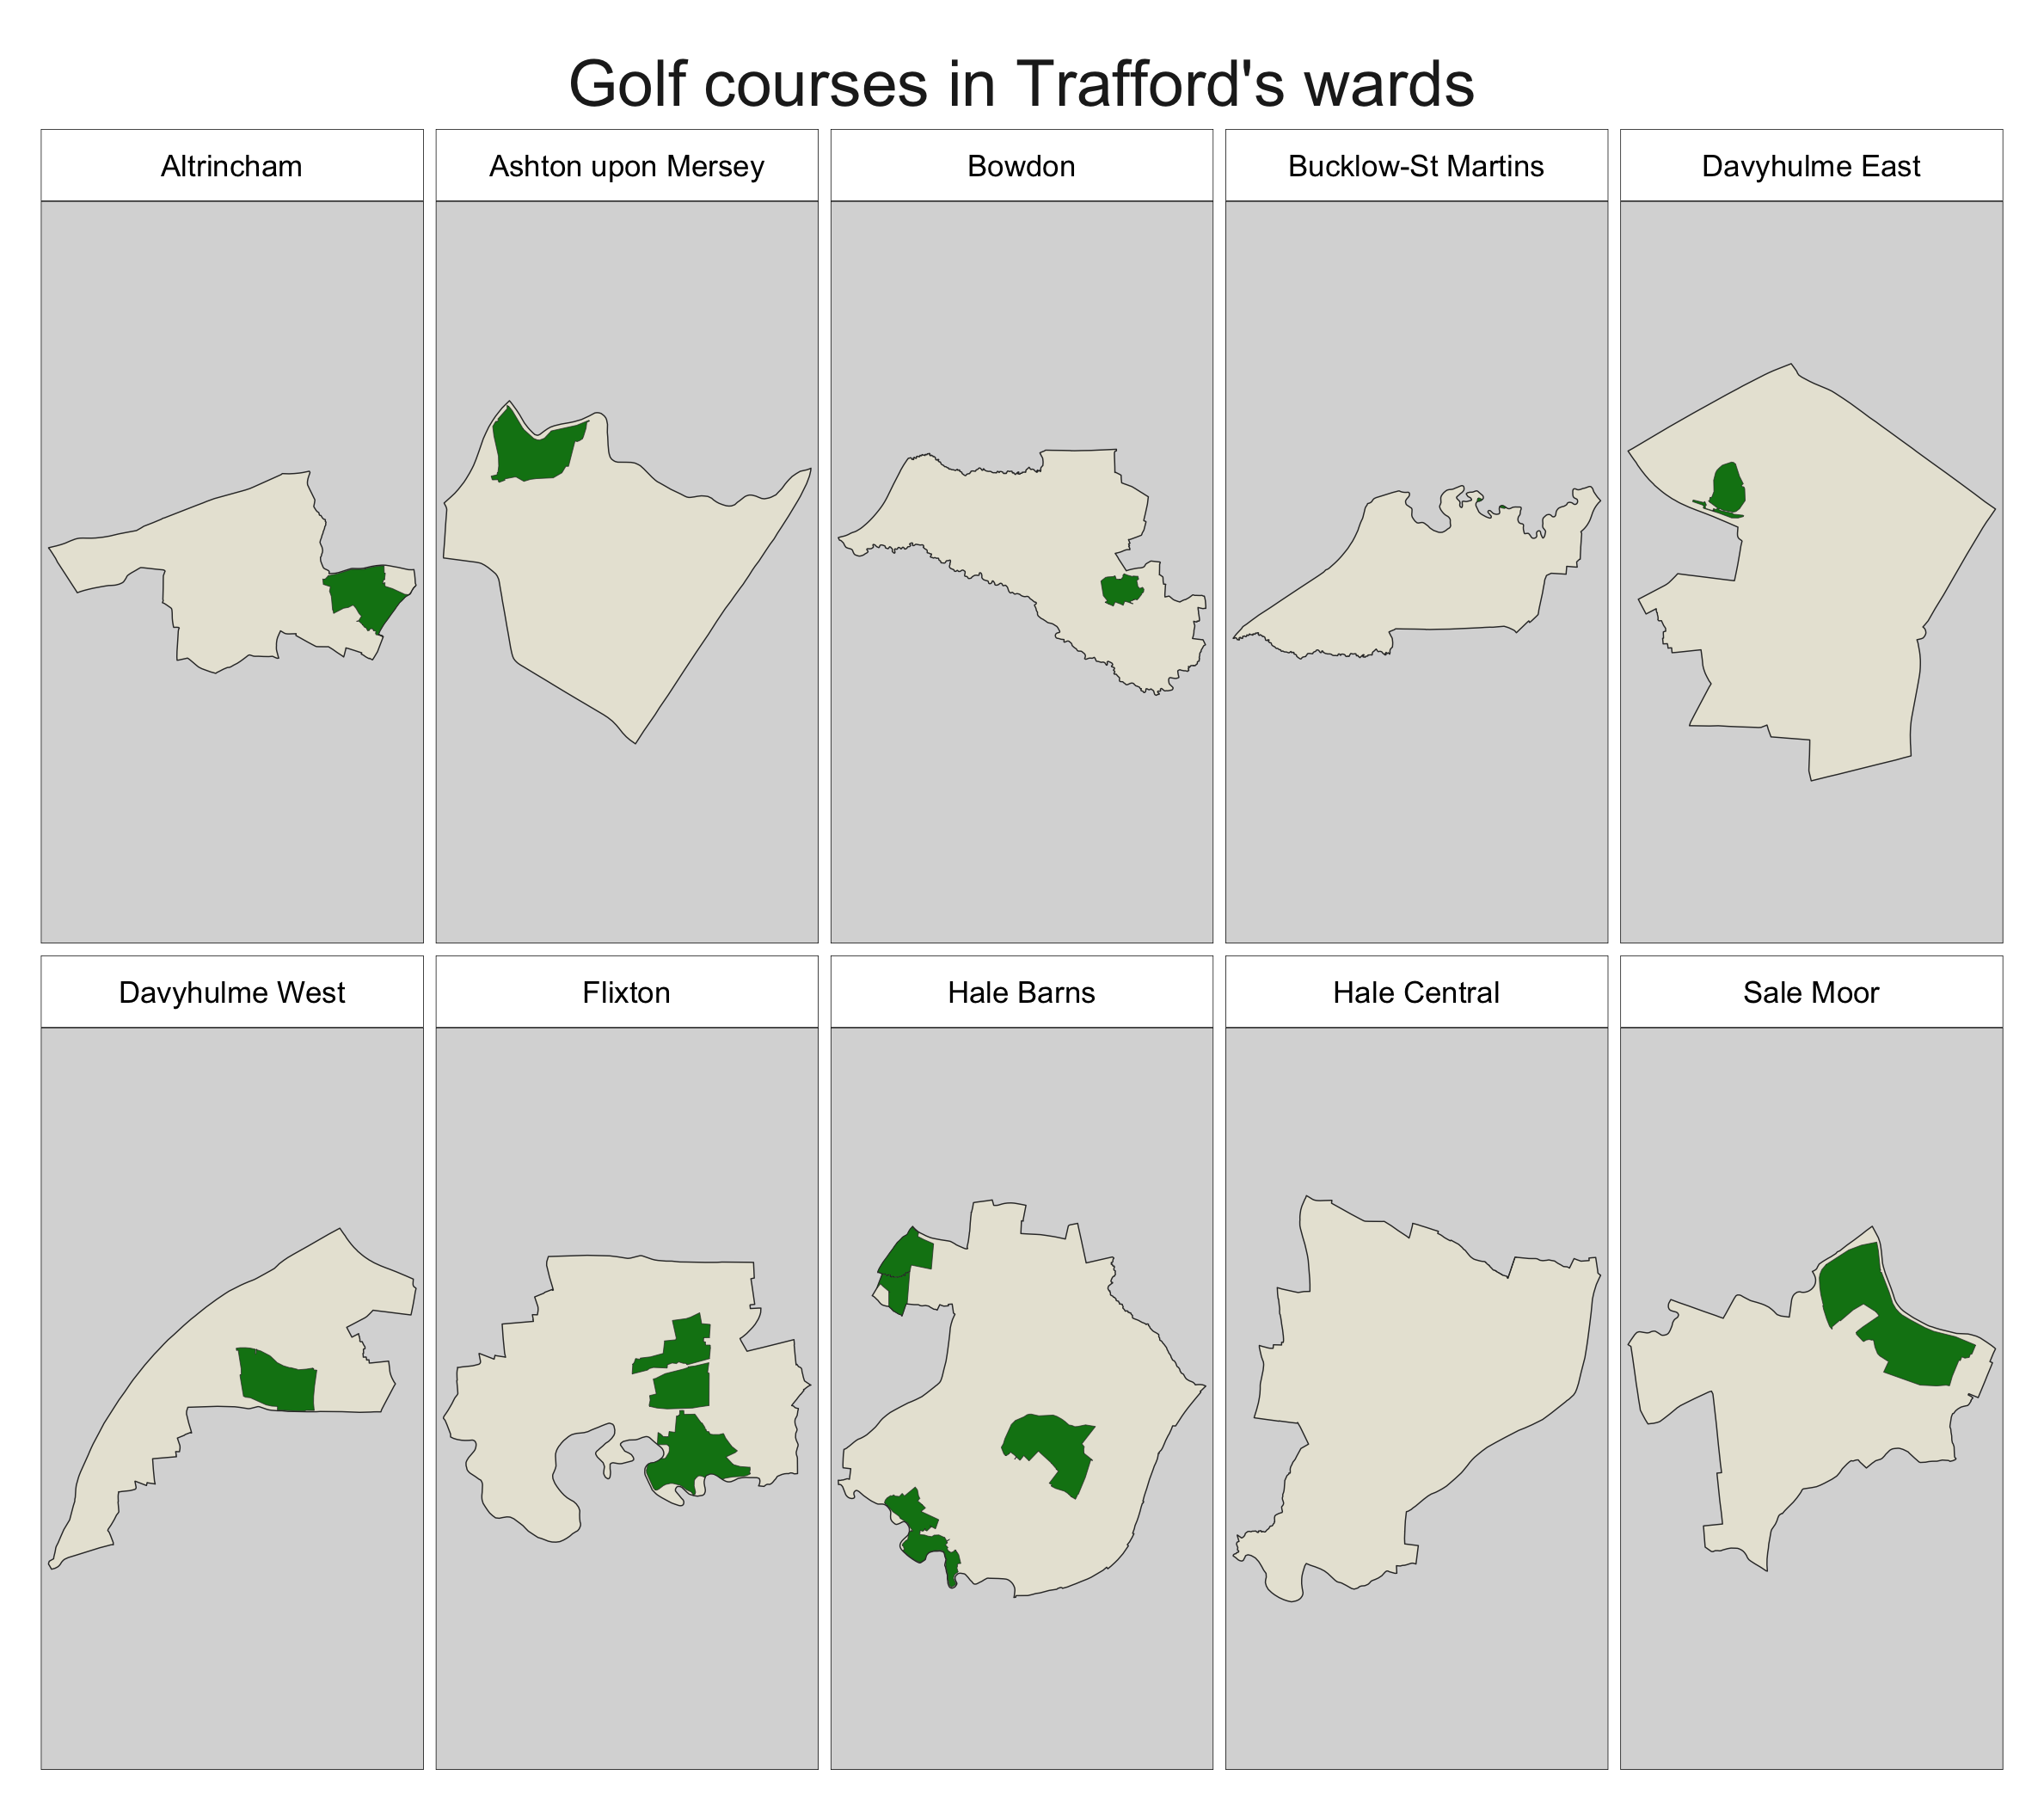 Small multiples map showing the area covered by golf courses in Trafford's electoral wards.